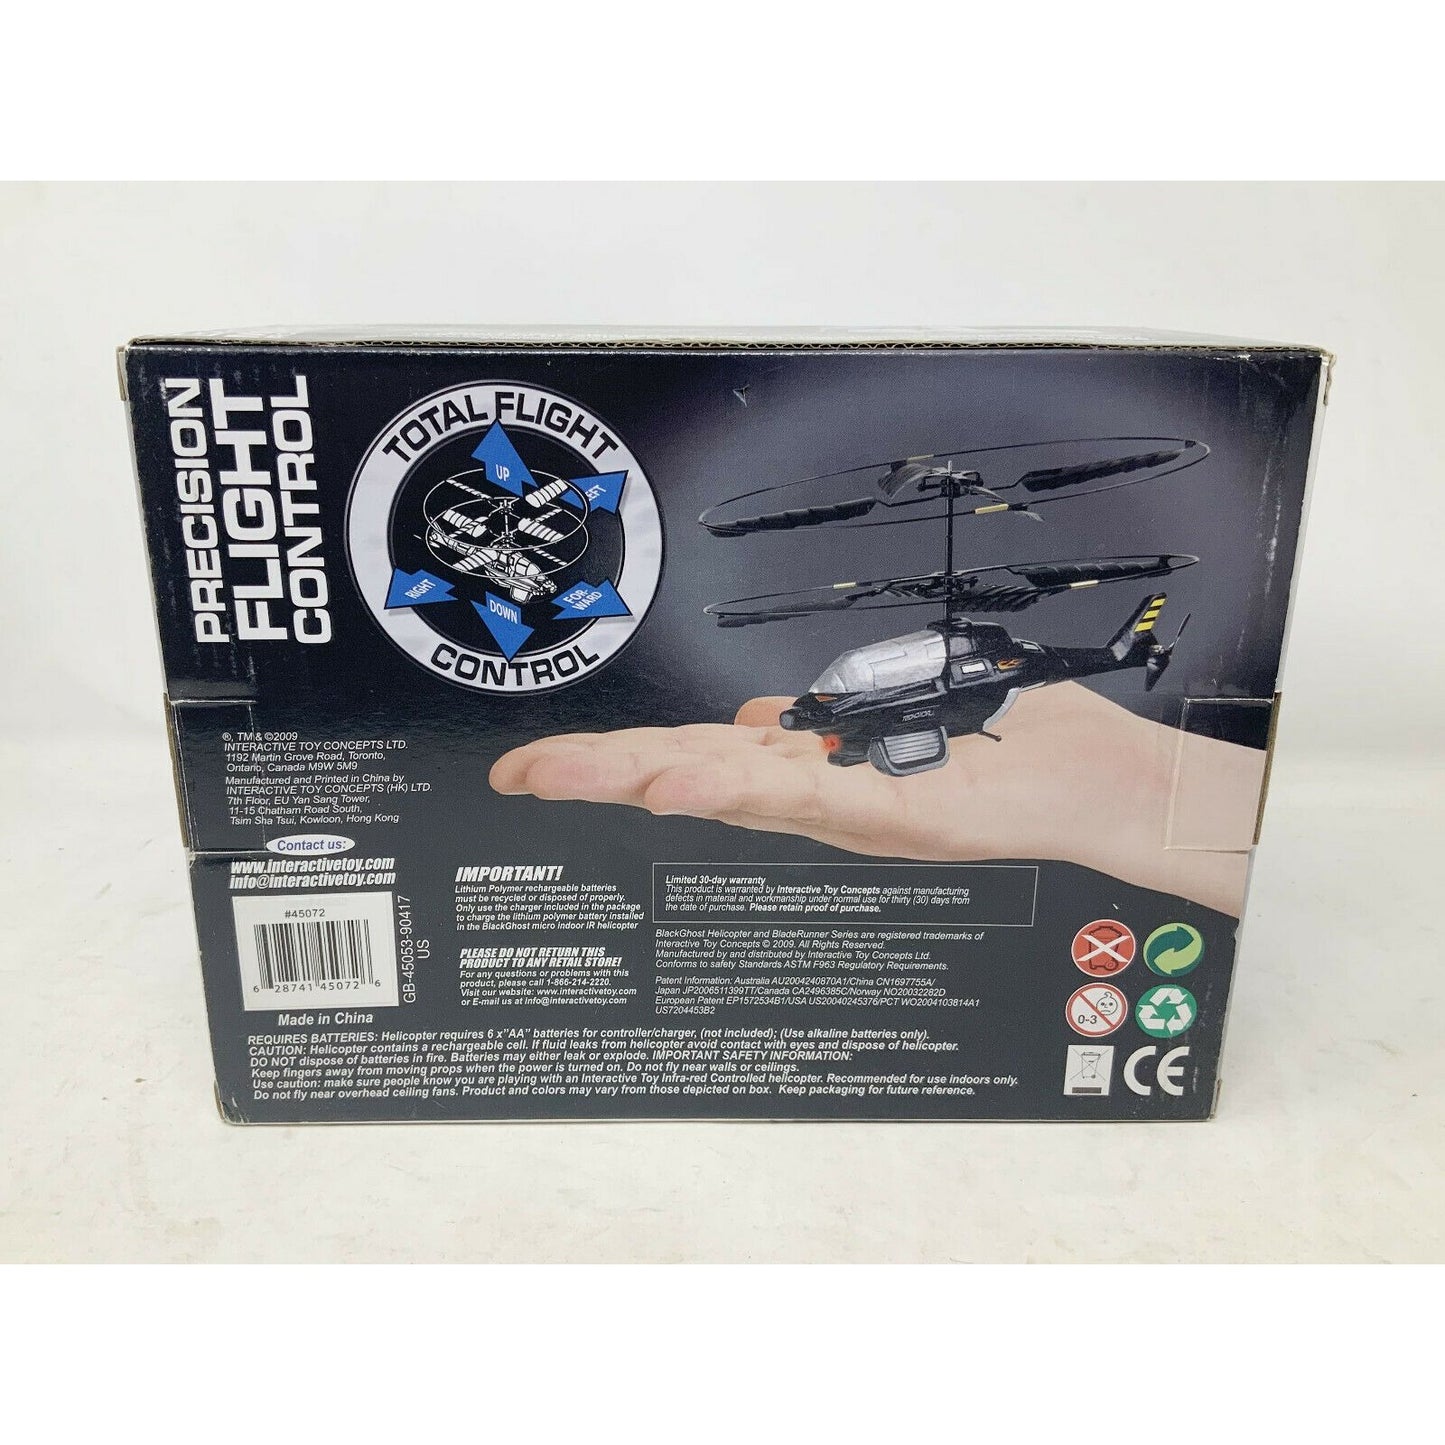 BLACKGHOST Micro Indoor IR Controlled HELICOPTER New in Box